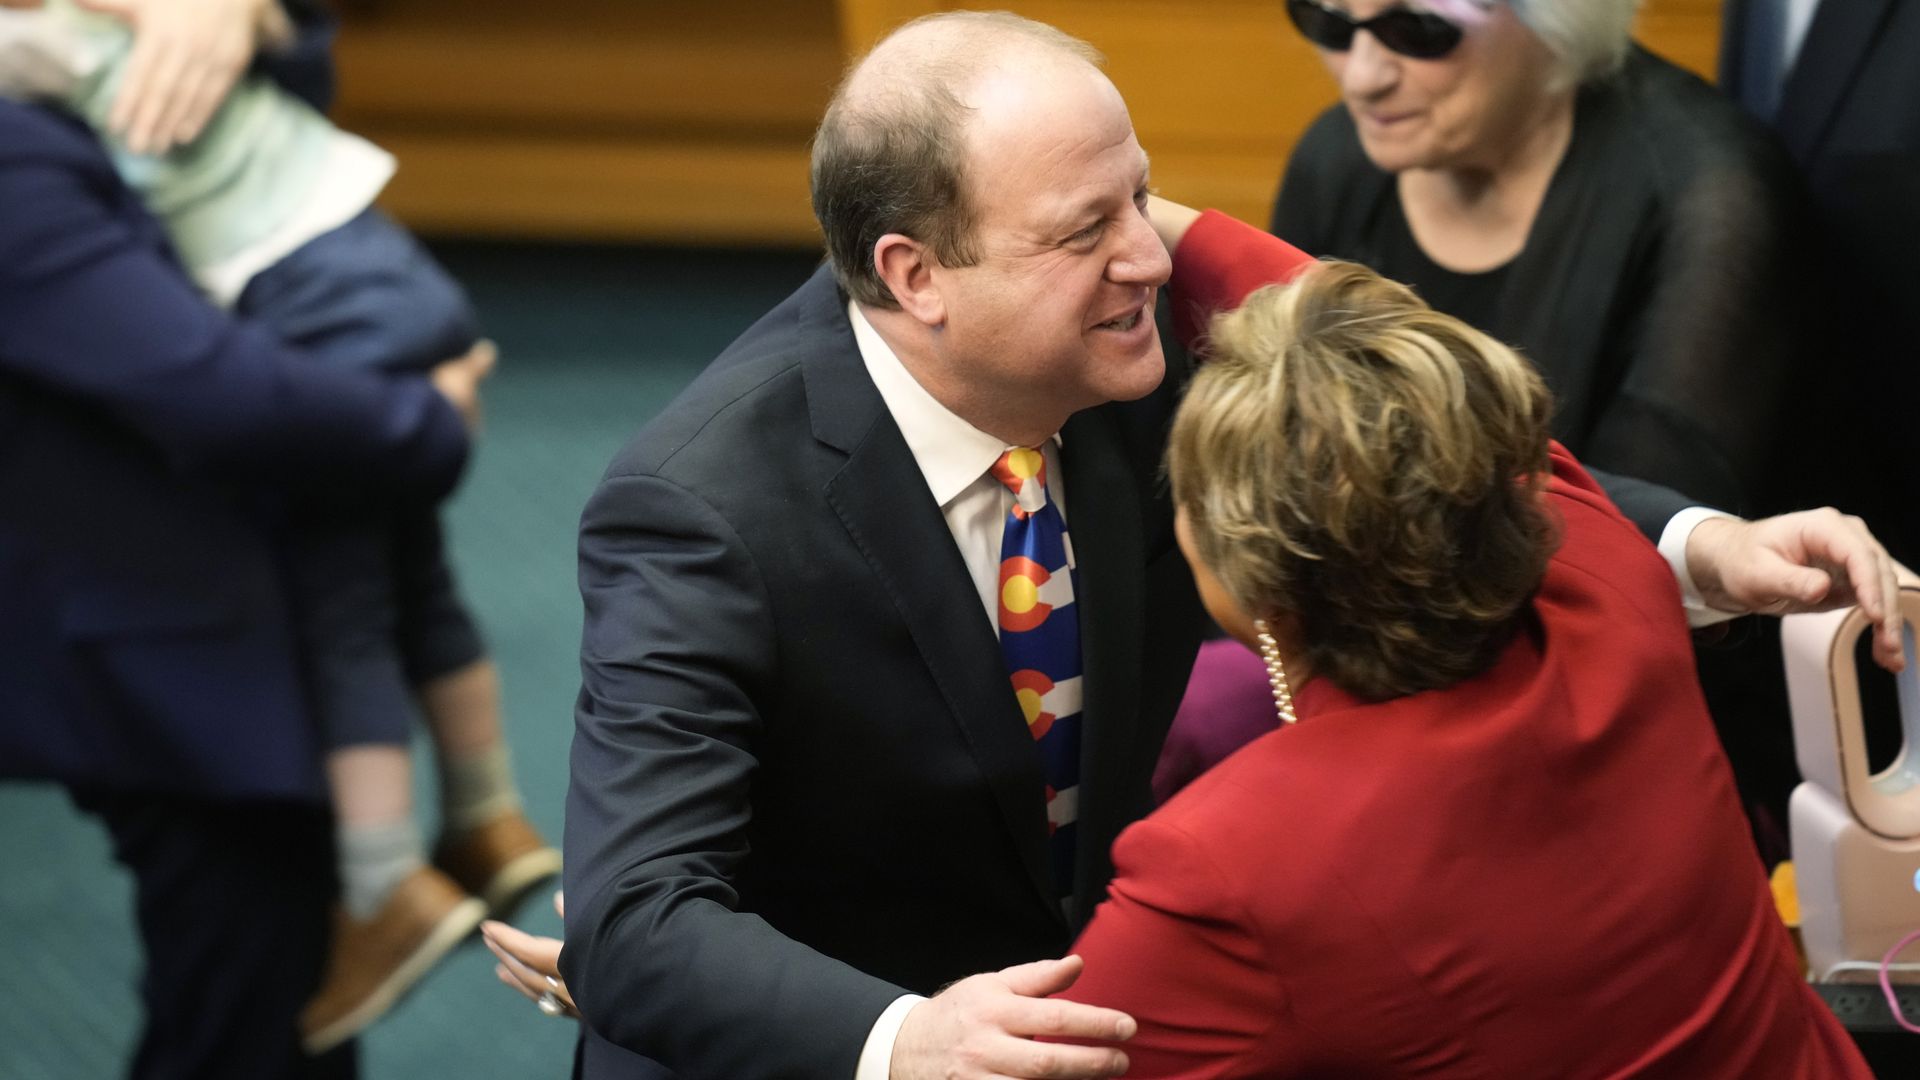 Colorado Gov. Jared Polis, center, hugs state Rep. Monica Duran, D-Wheat Ridge, after delivering his State of the State on Tuesday. Photo: David Zalubowski/AP